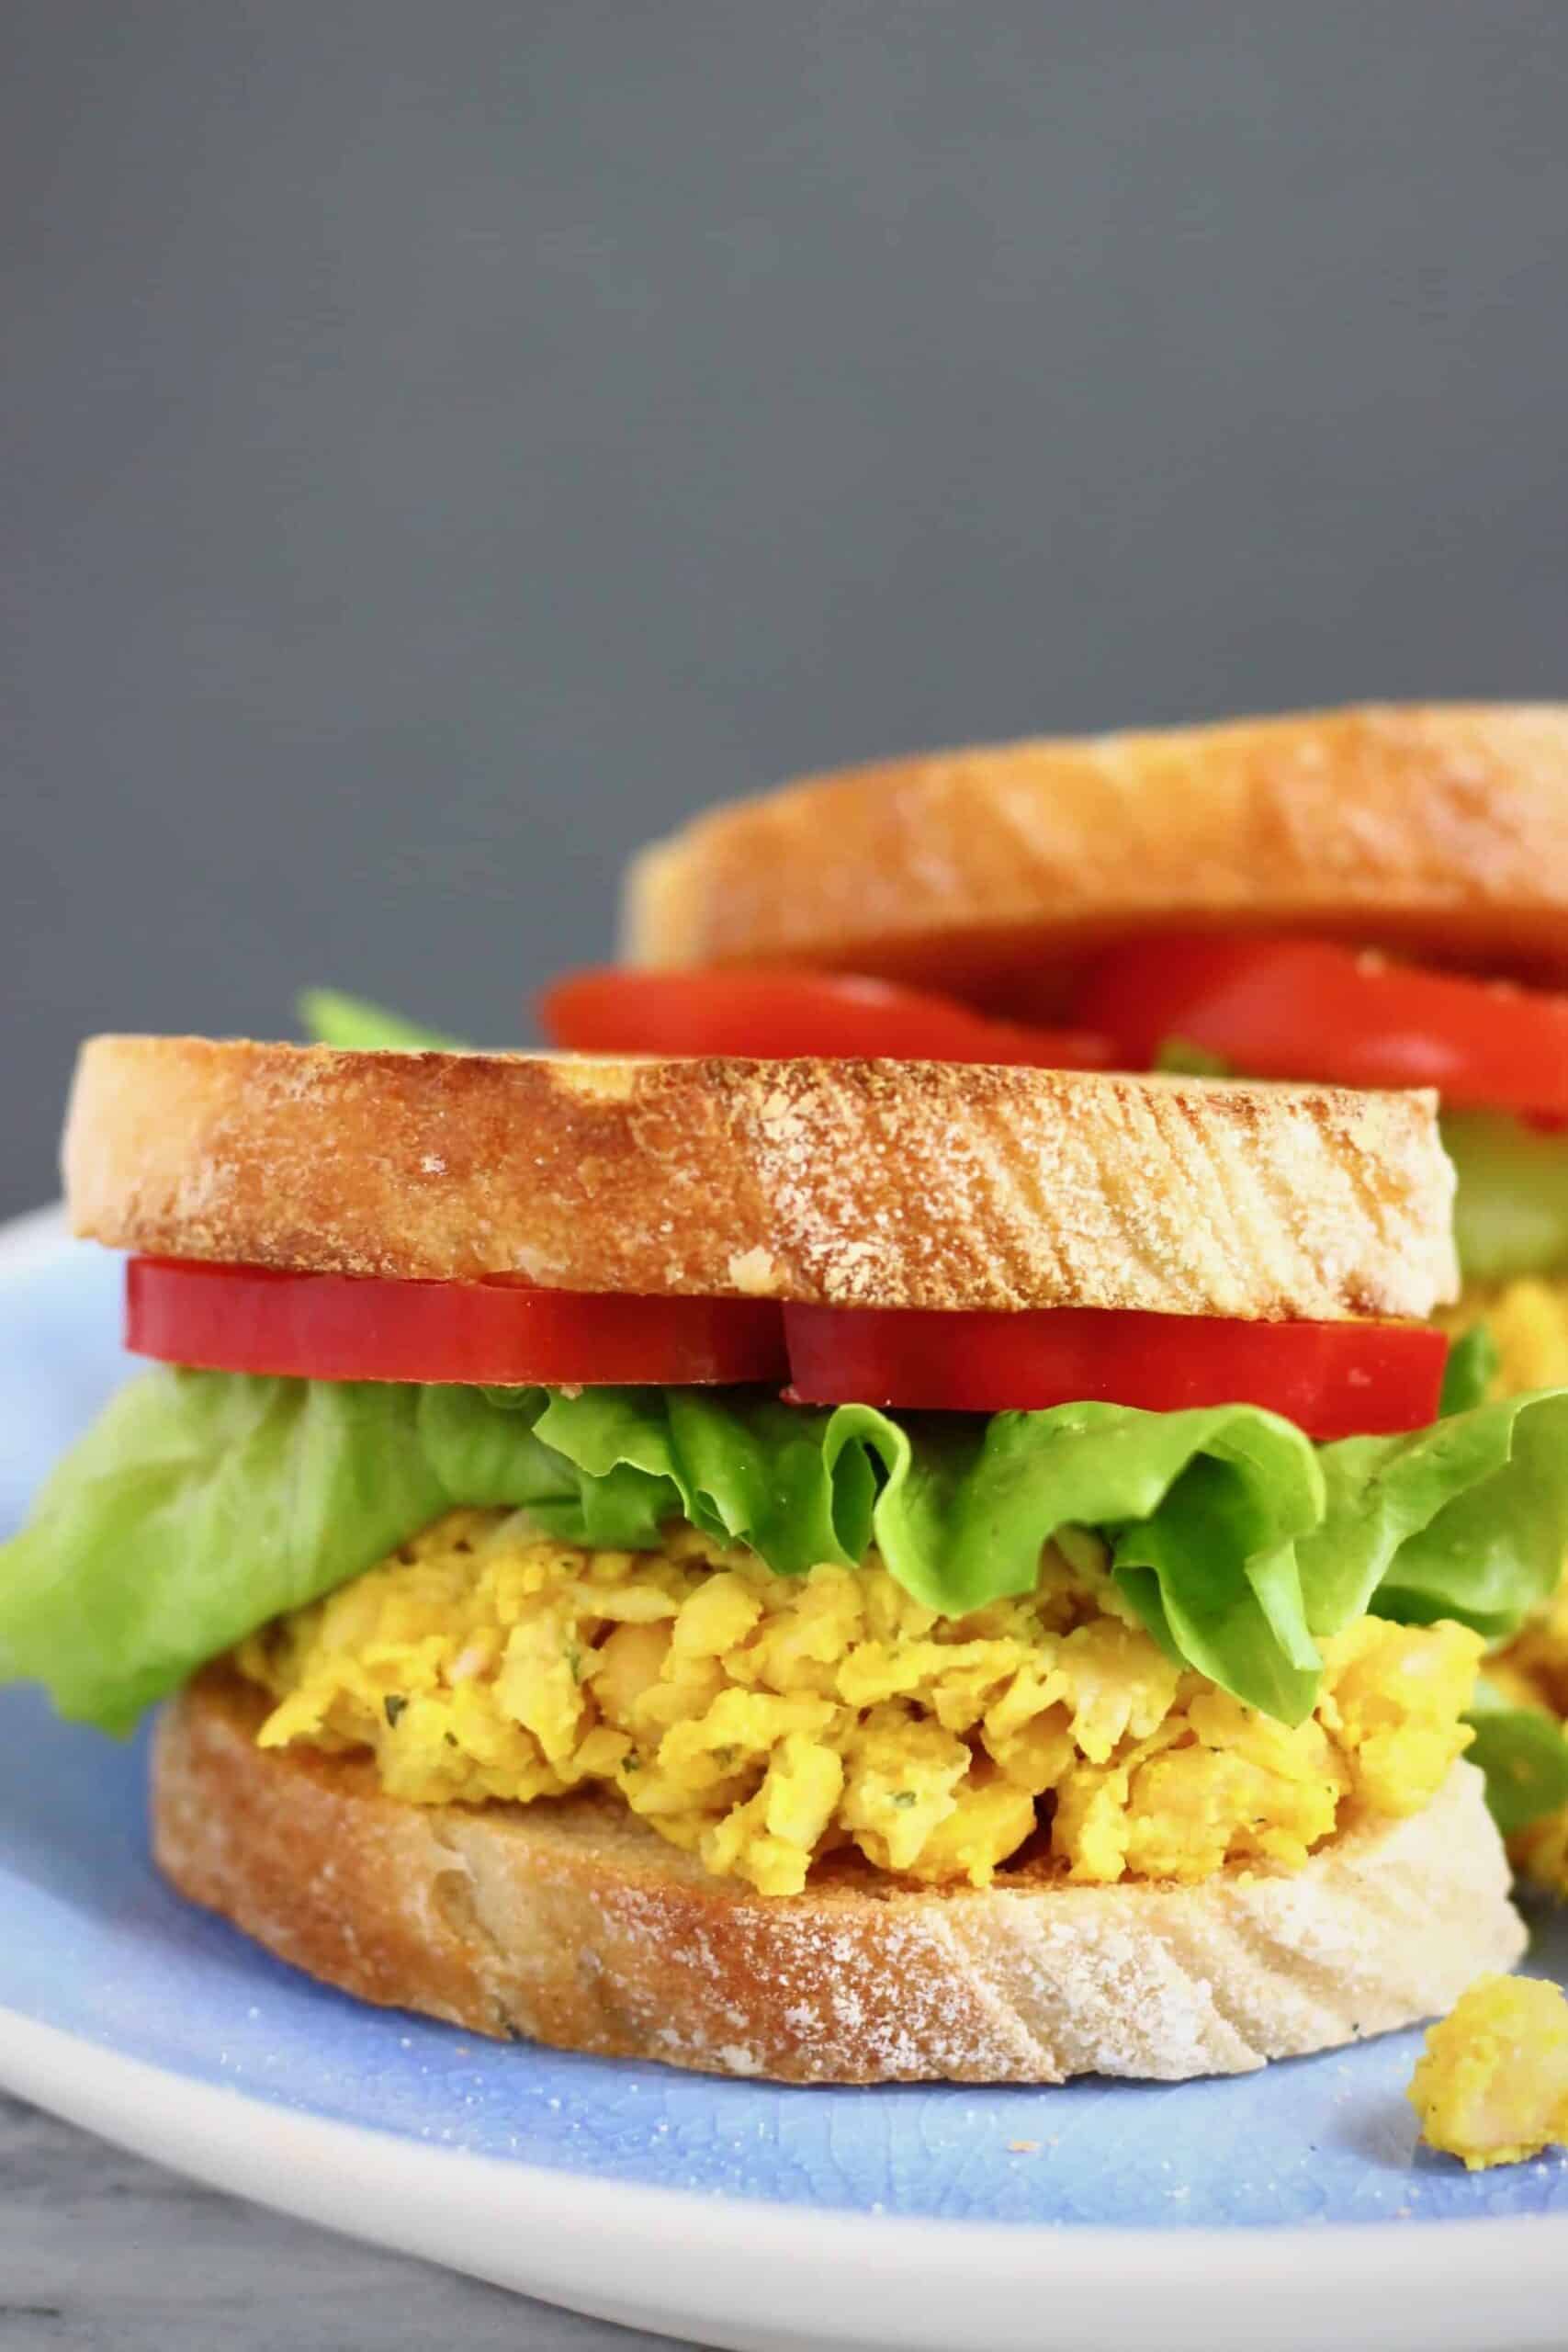 Two sandwiches with curried chickpeas, lettuce and sliced red pepper against a grey background